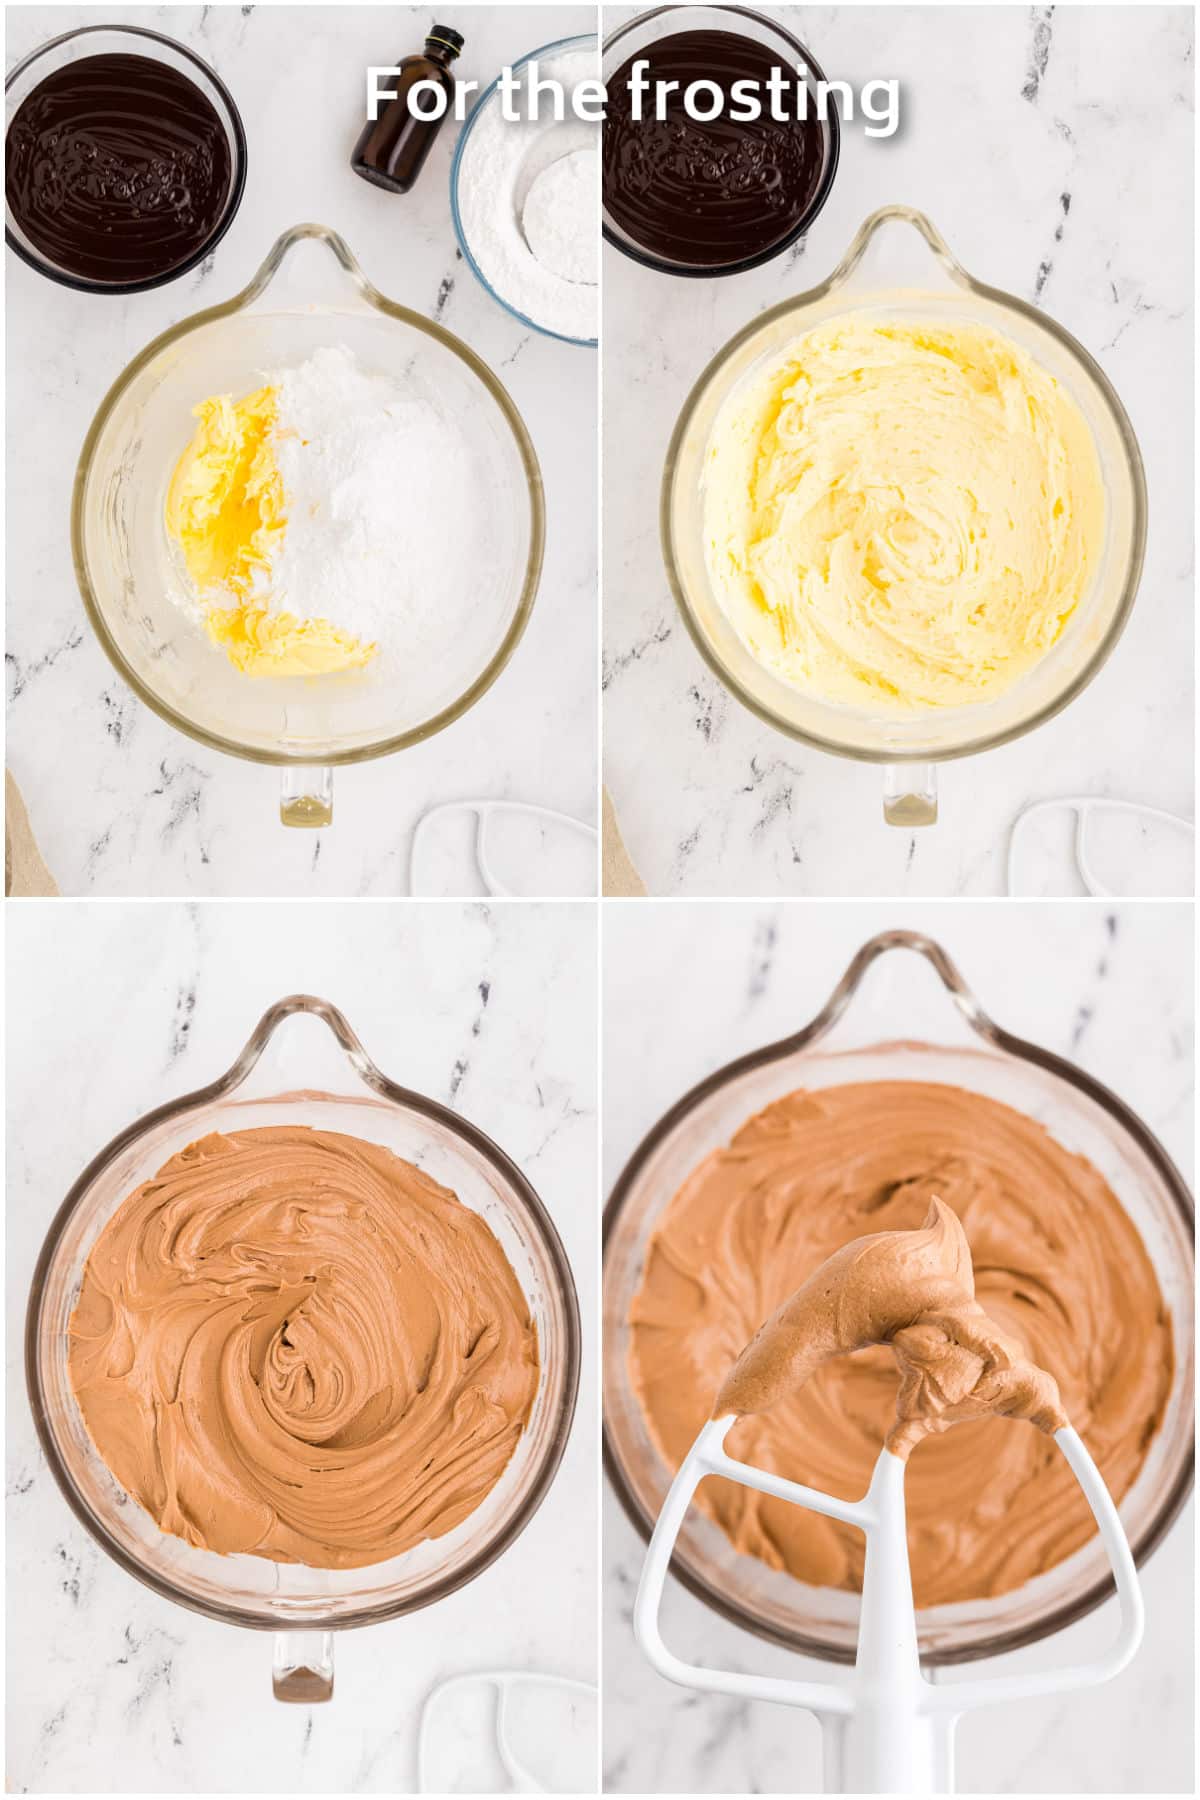 Butter, powdered sugar and ganache in a mixing bowl for frosting.